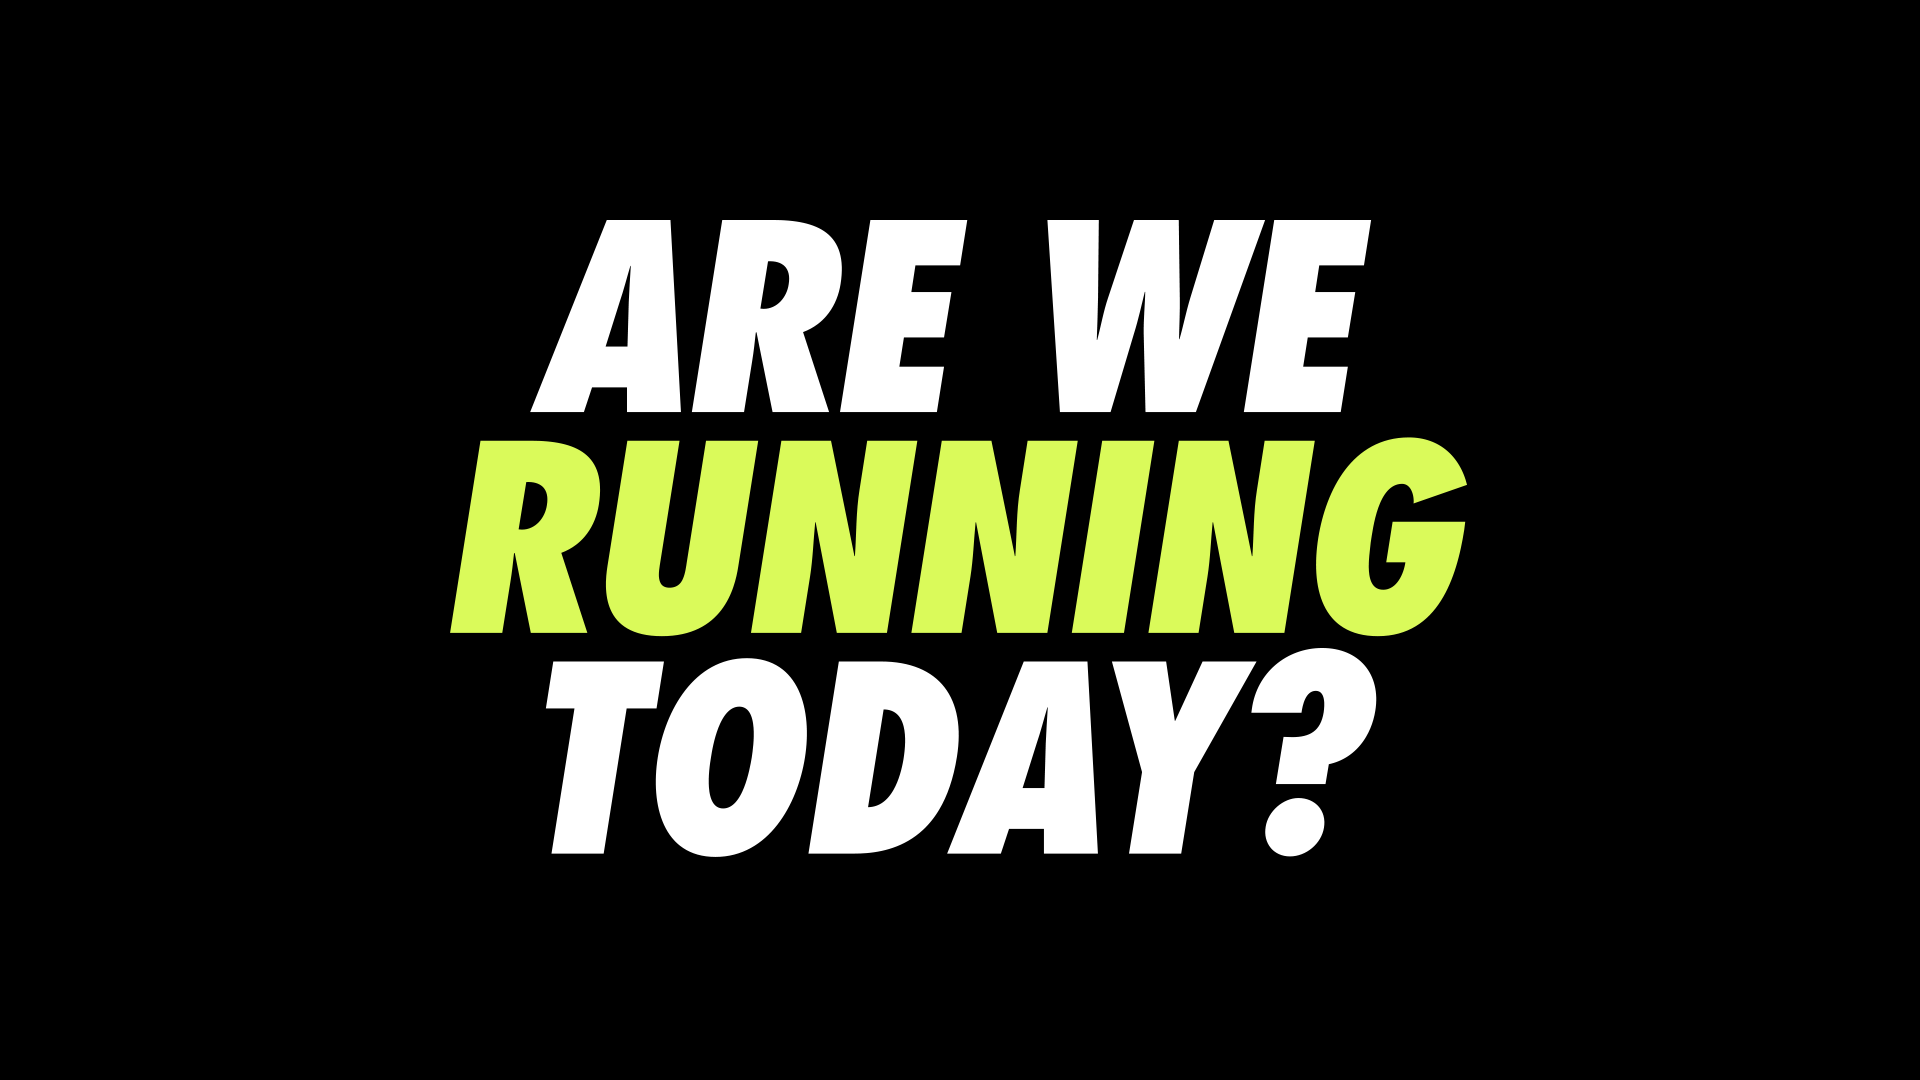 Are we running today?